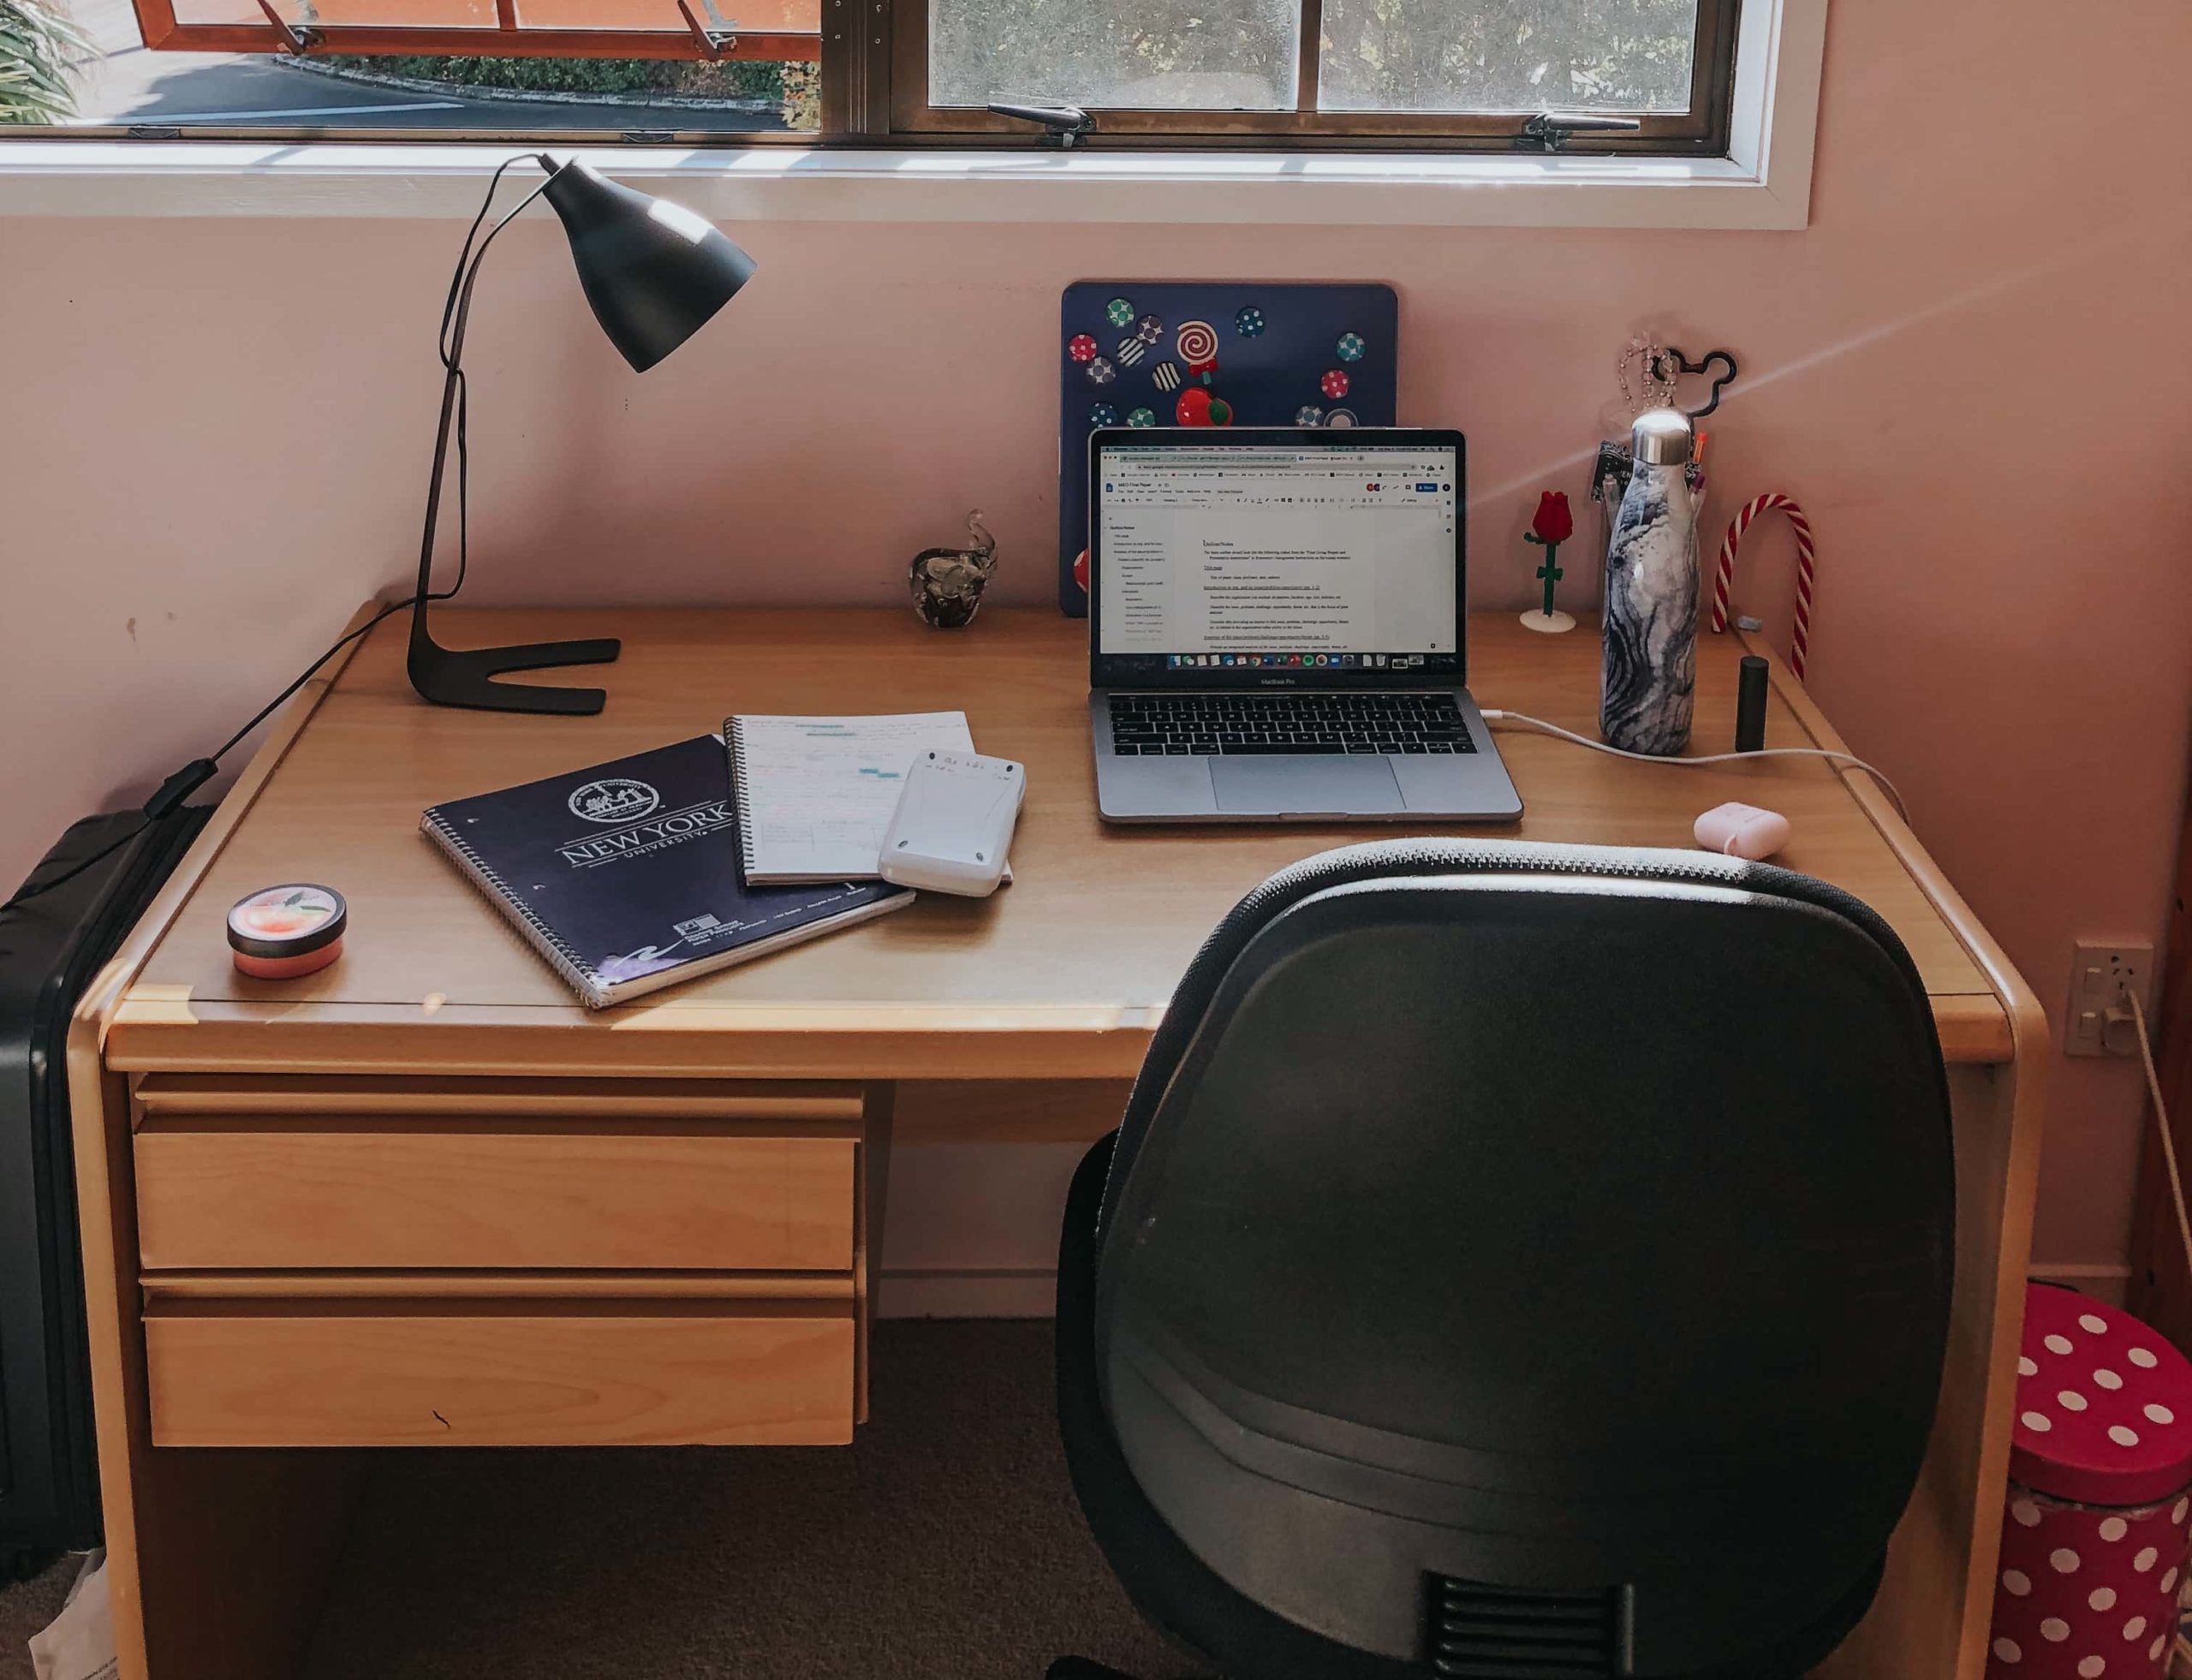 A laptop computer and reading lamp on a desk.